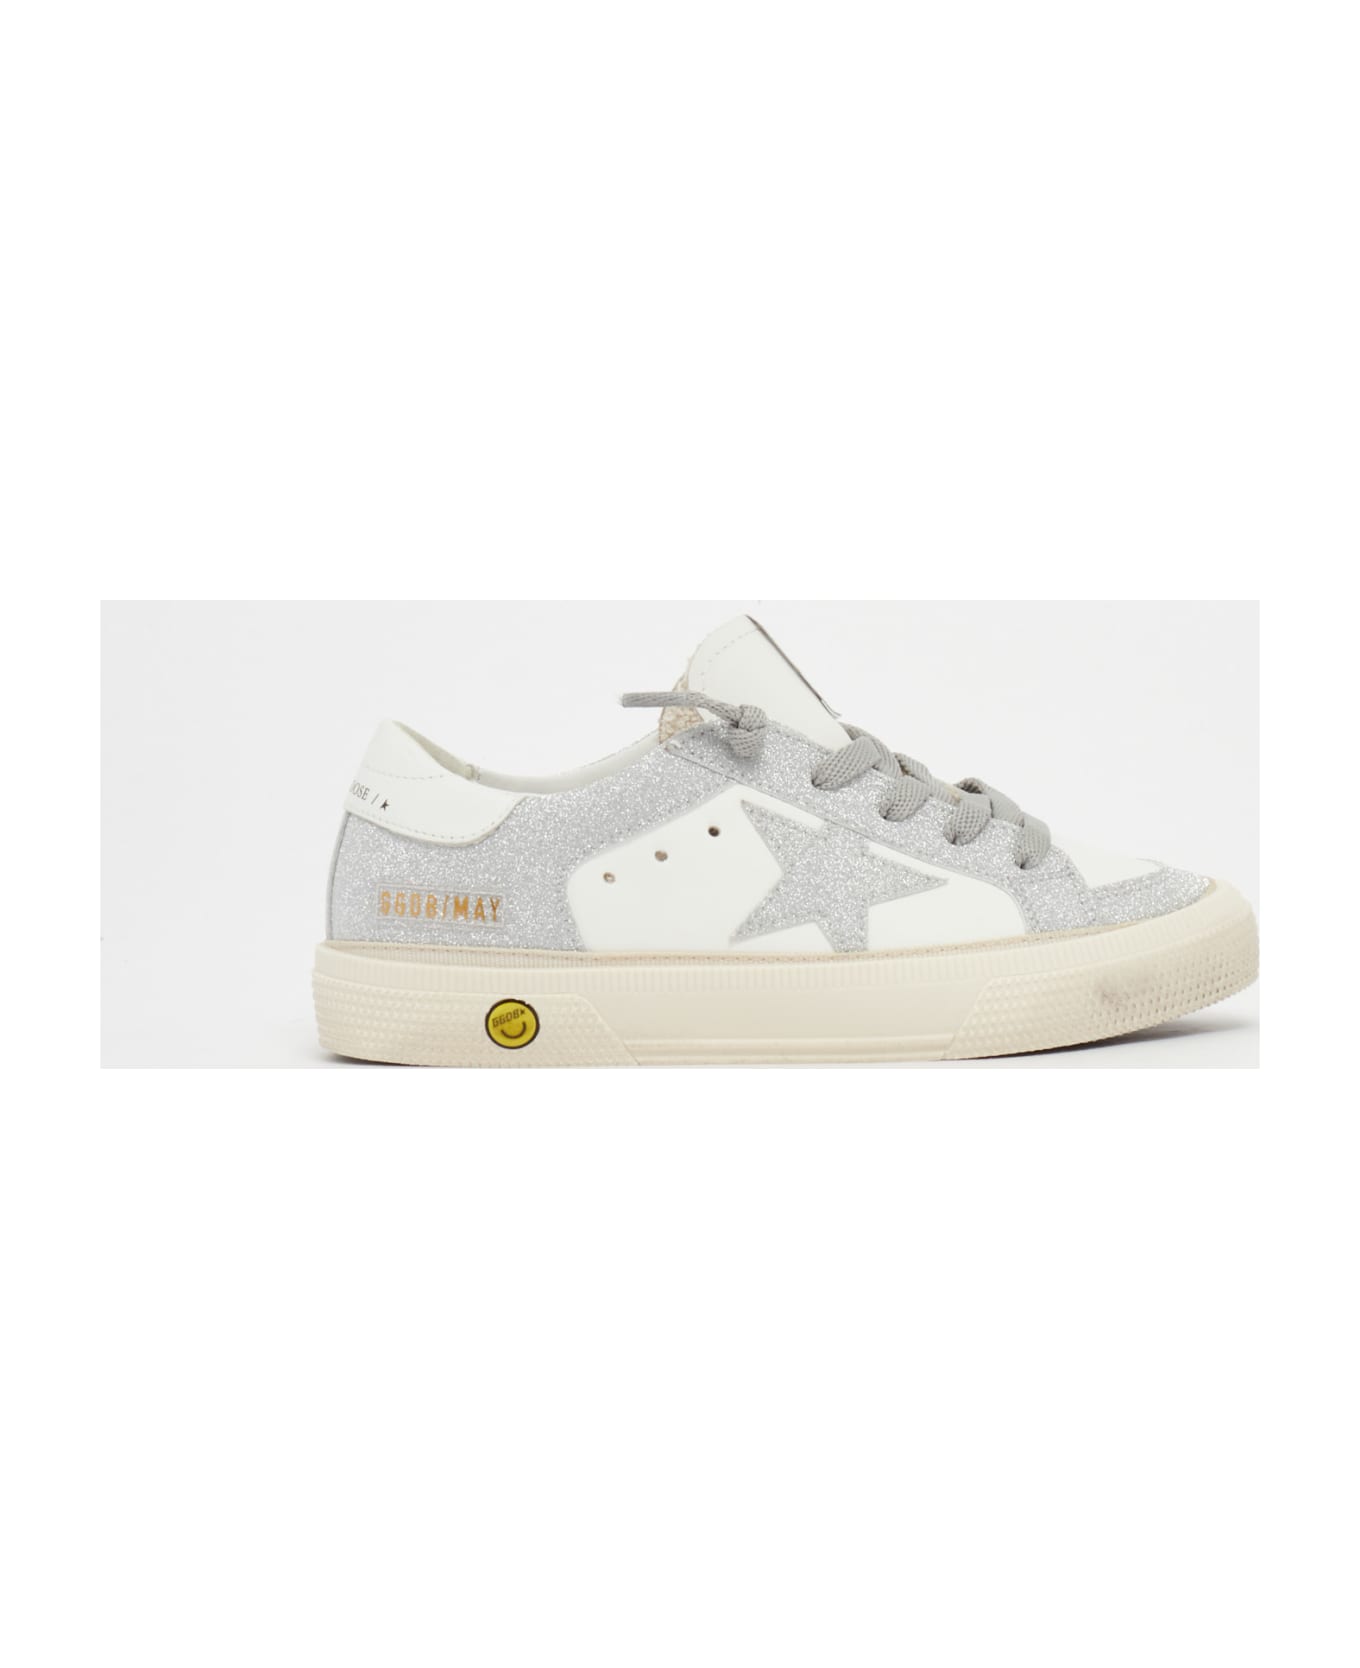 Golden Goose May Leather Sneaker - B.CO-ARGENTO